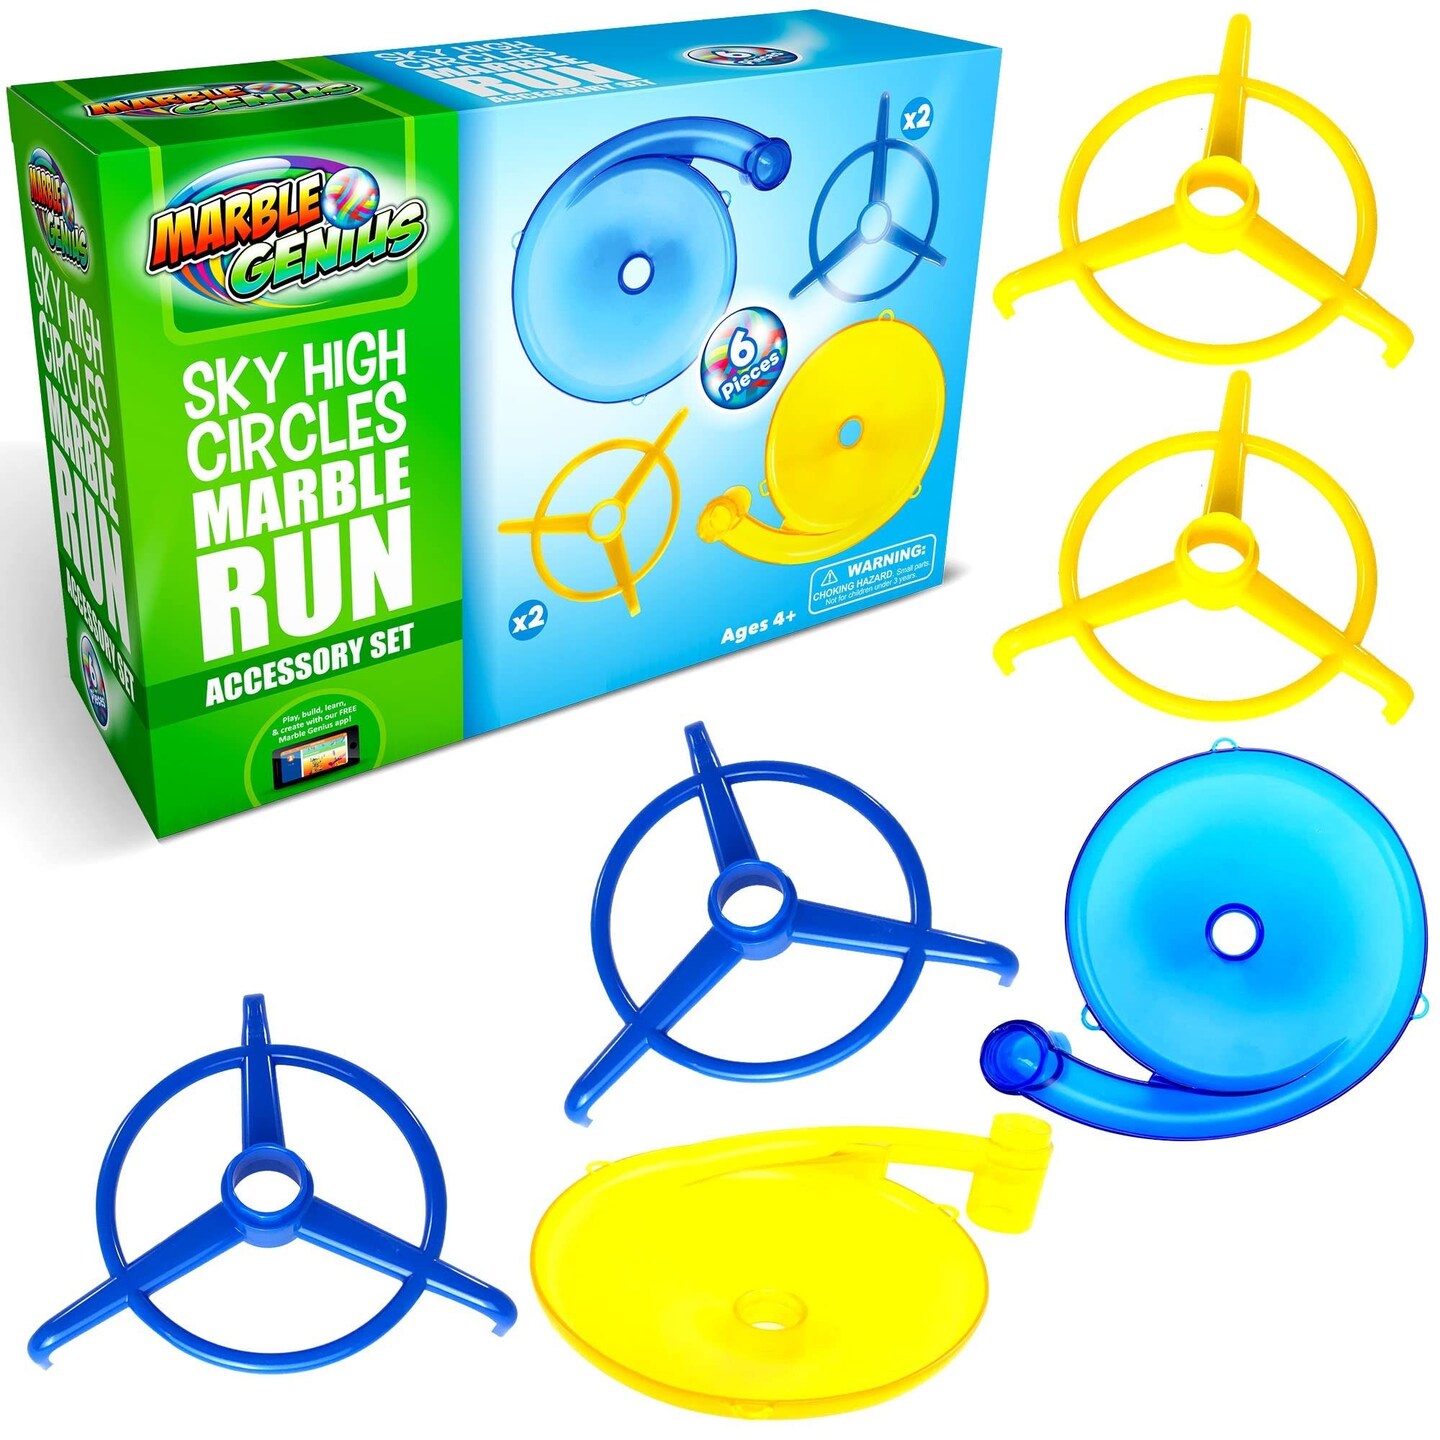 Marble Genius Sky High Circles Accessory Add-On Set - Take Your Marble Run to the Next Level &#x26; Create a Gravity-Defying Track Race Thrills with 6 Pieces of Towering, Twisty-Turny Fun, Perfect for Kids